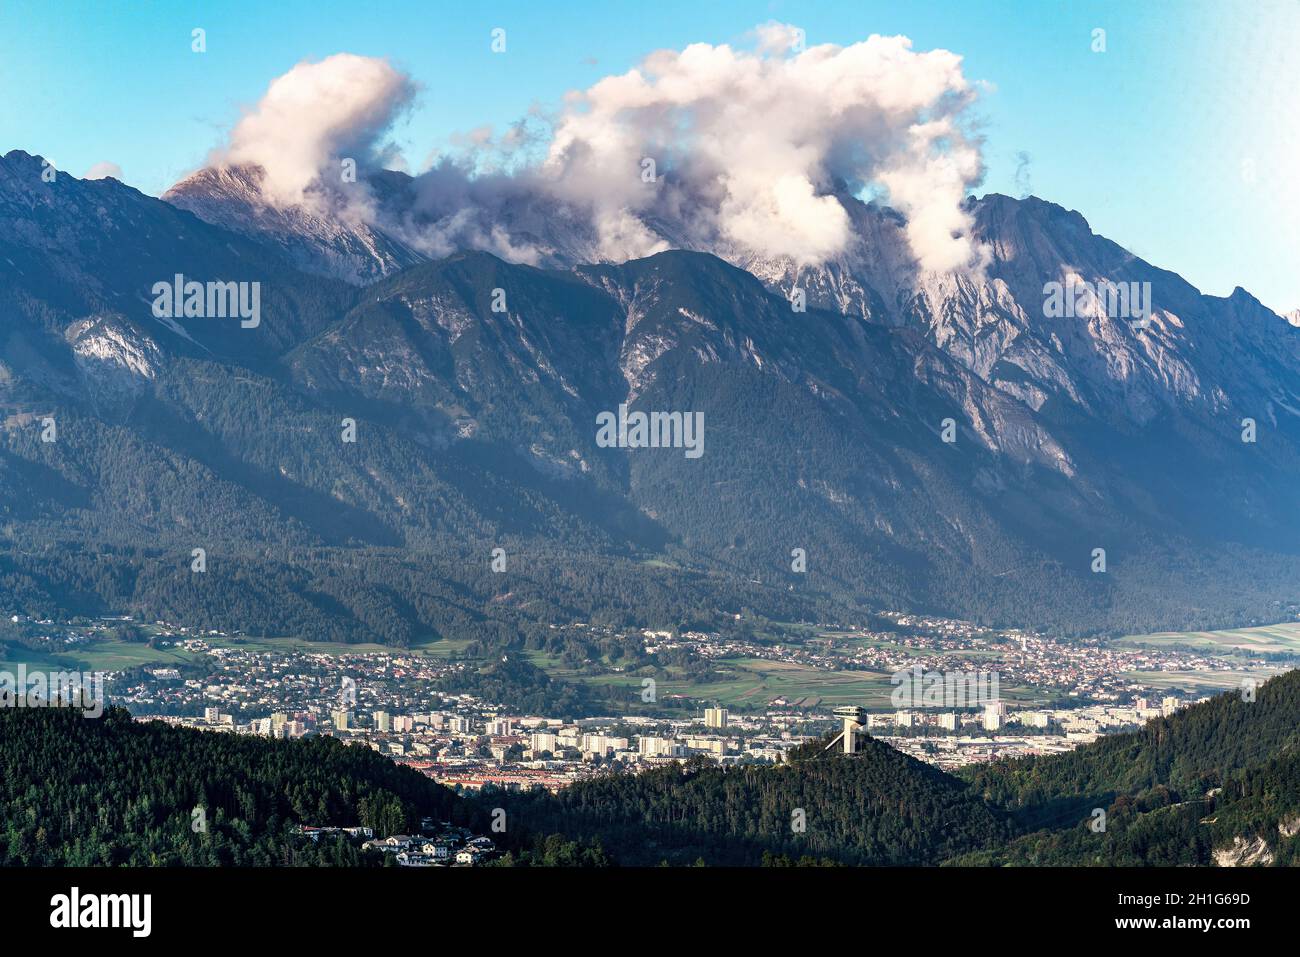 View on the austrian city of Innsbruck from the south with hugh alp mountains in the background Stock Photo